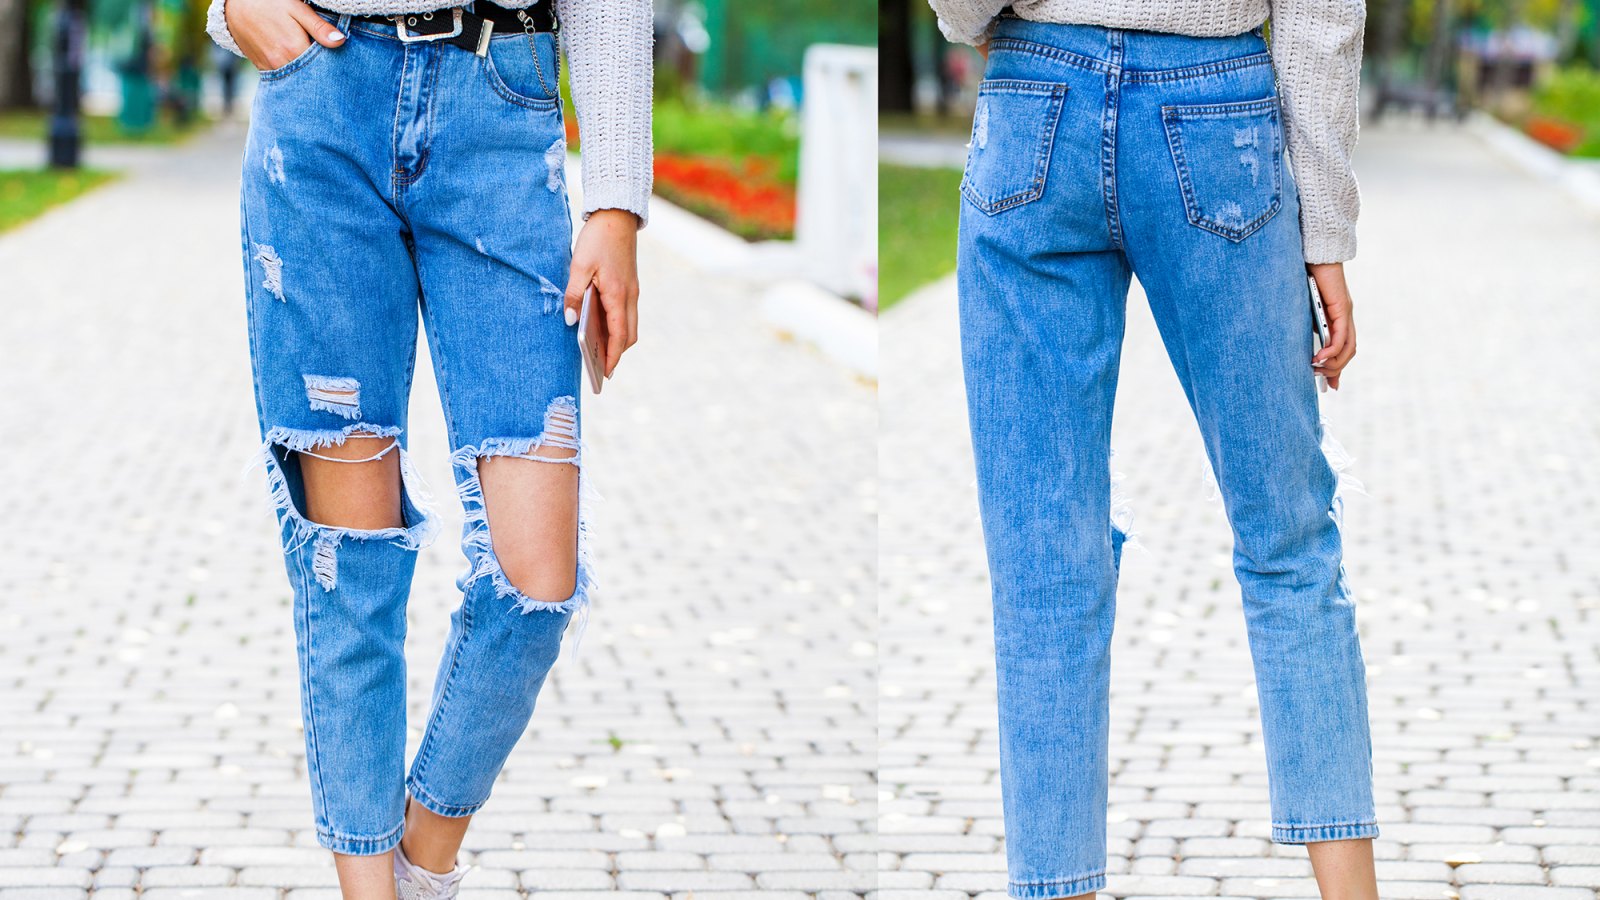 The Best Jeans of 2020